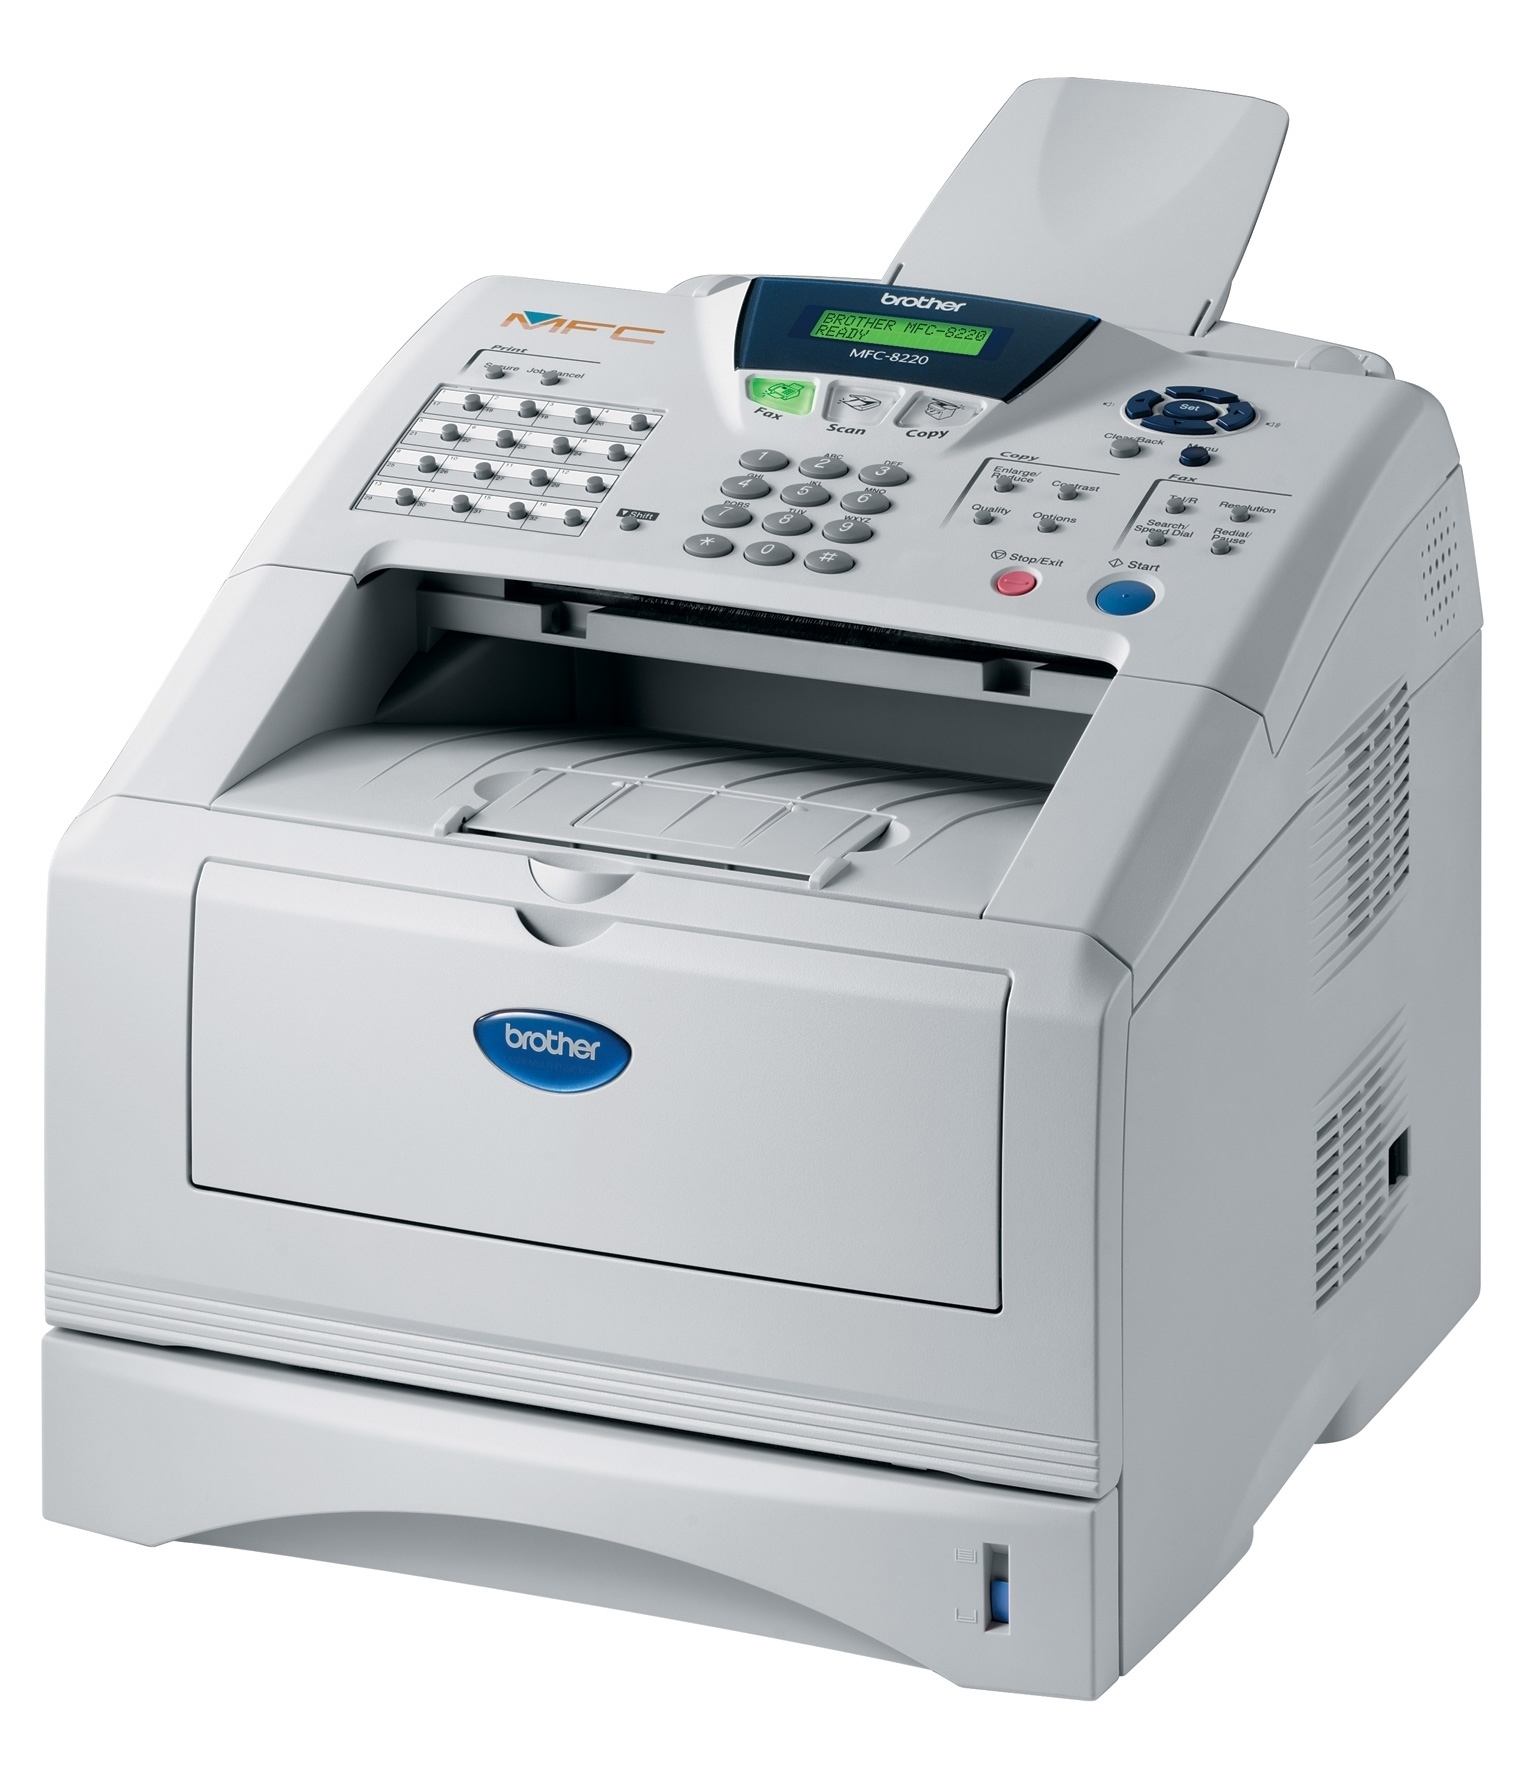 Brother MFC-8220 multifunctional Laser 21 ppm 600 x 2400 DPI A4